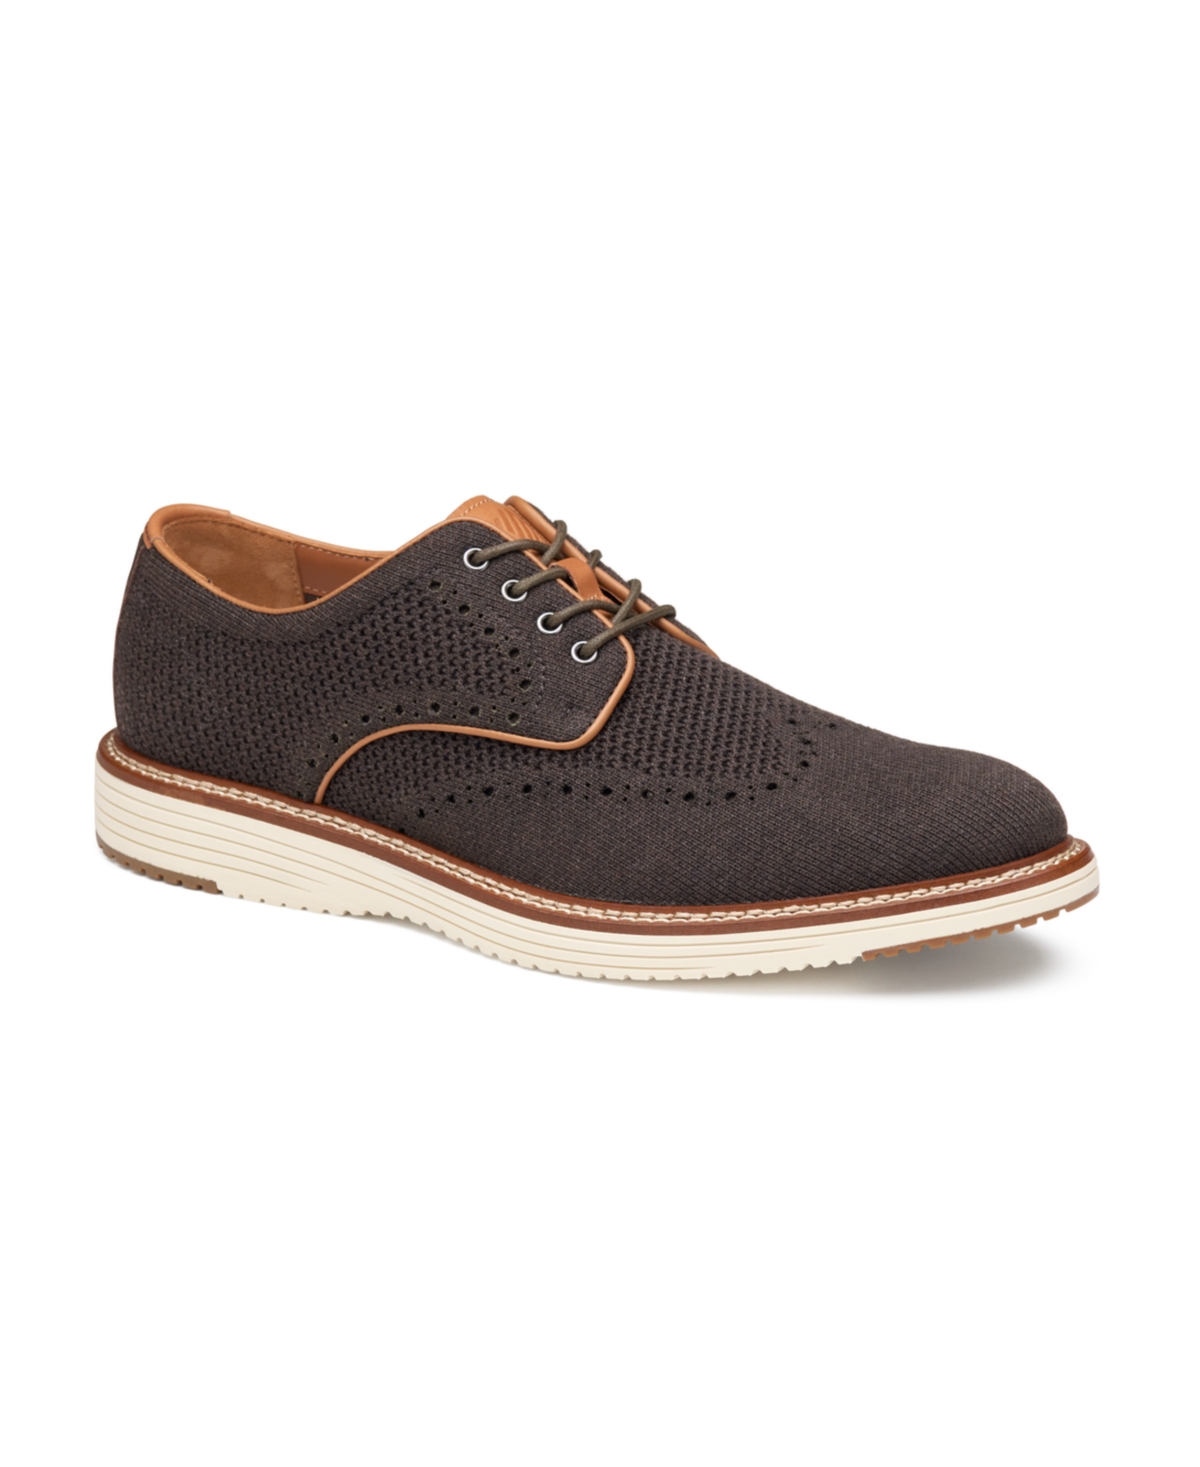 Men's Upton Knit Wingtip Dress Casual Lace Up Sneakers - Brown